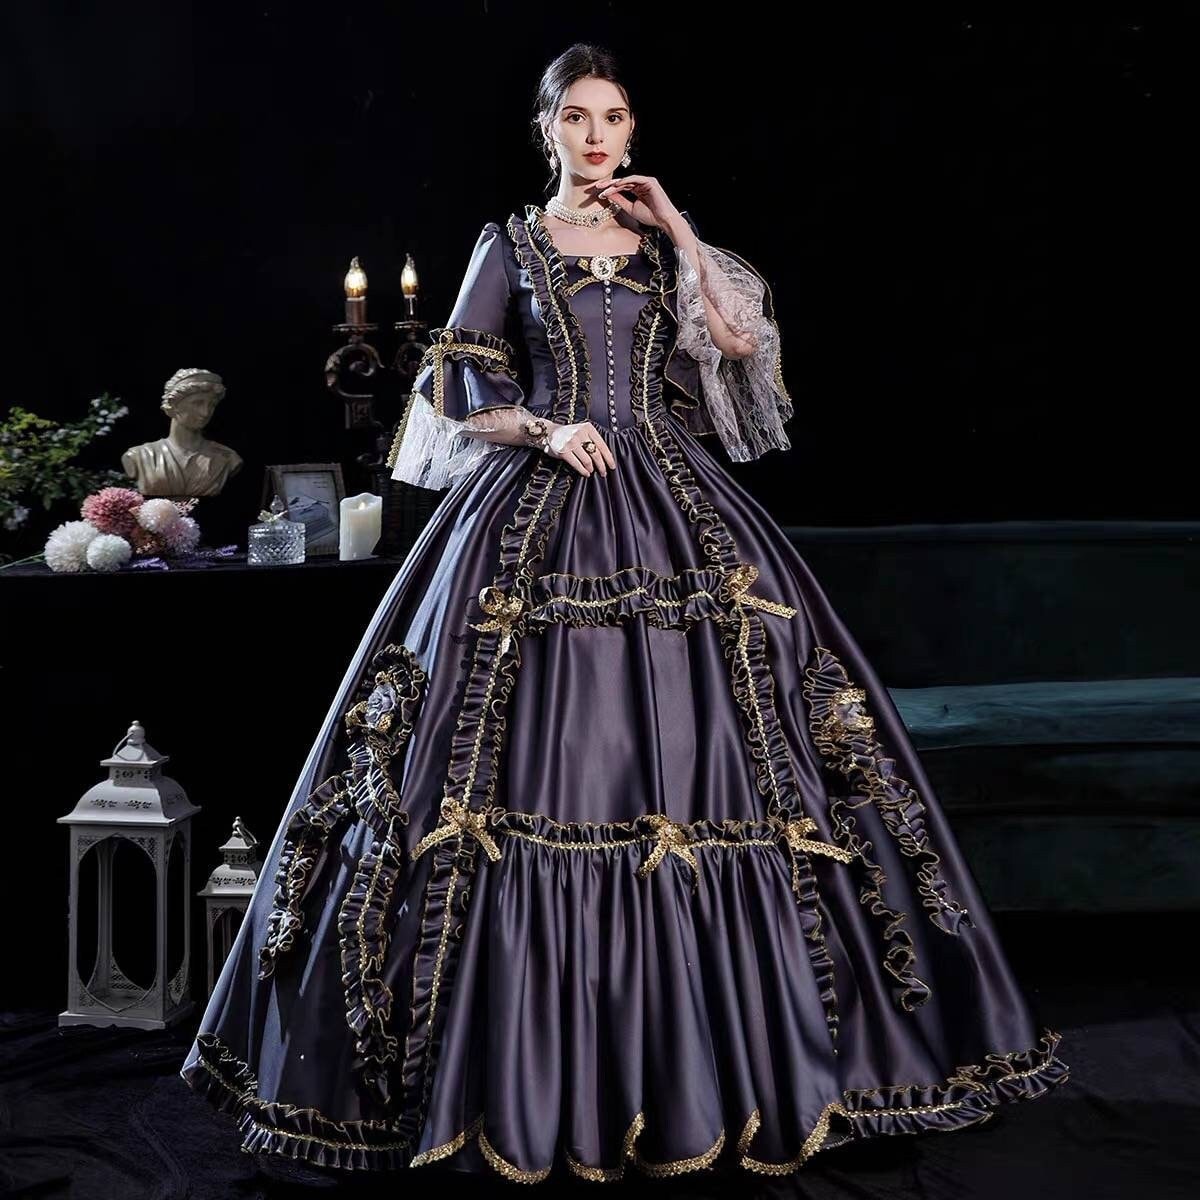 Women's Southern Belle Victorian Dress Gothic Rococo Masquerade Prom Dress  Marie Antoinette Wedding Ball Gown - Walmart.com